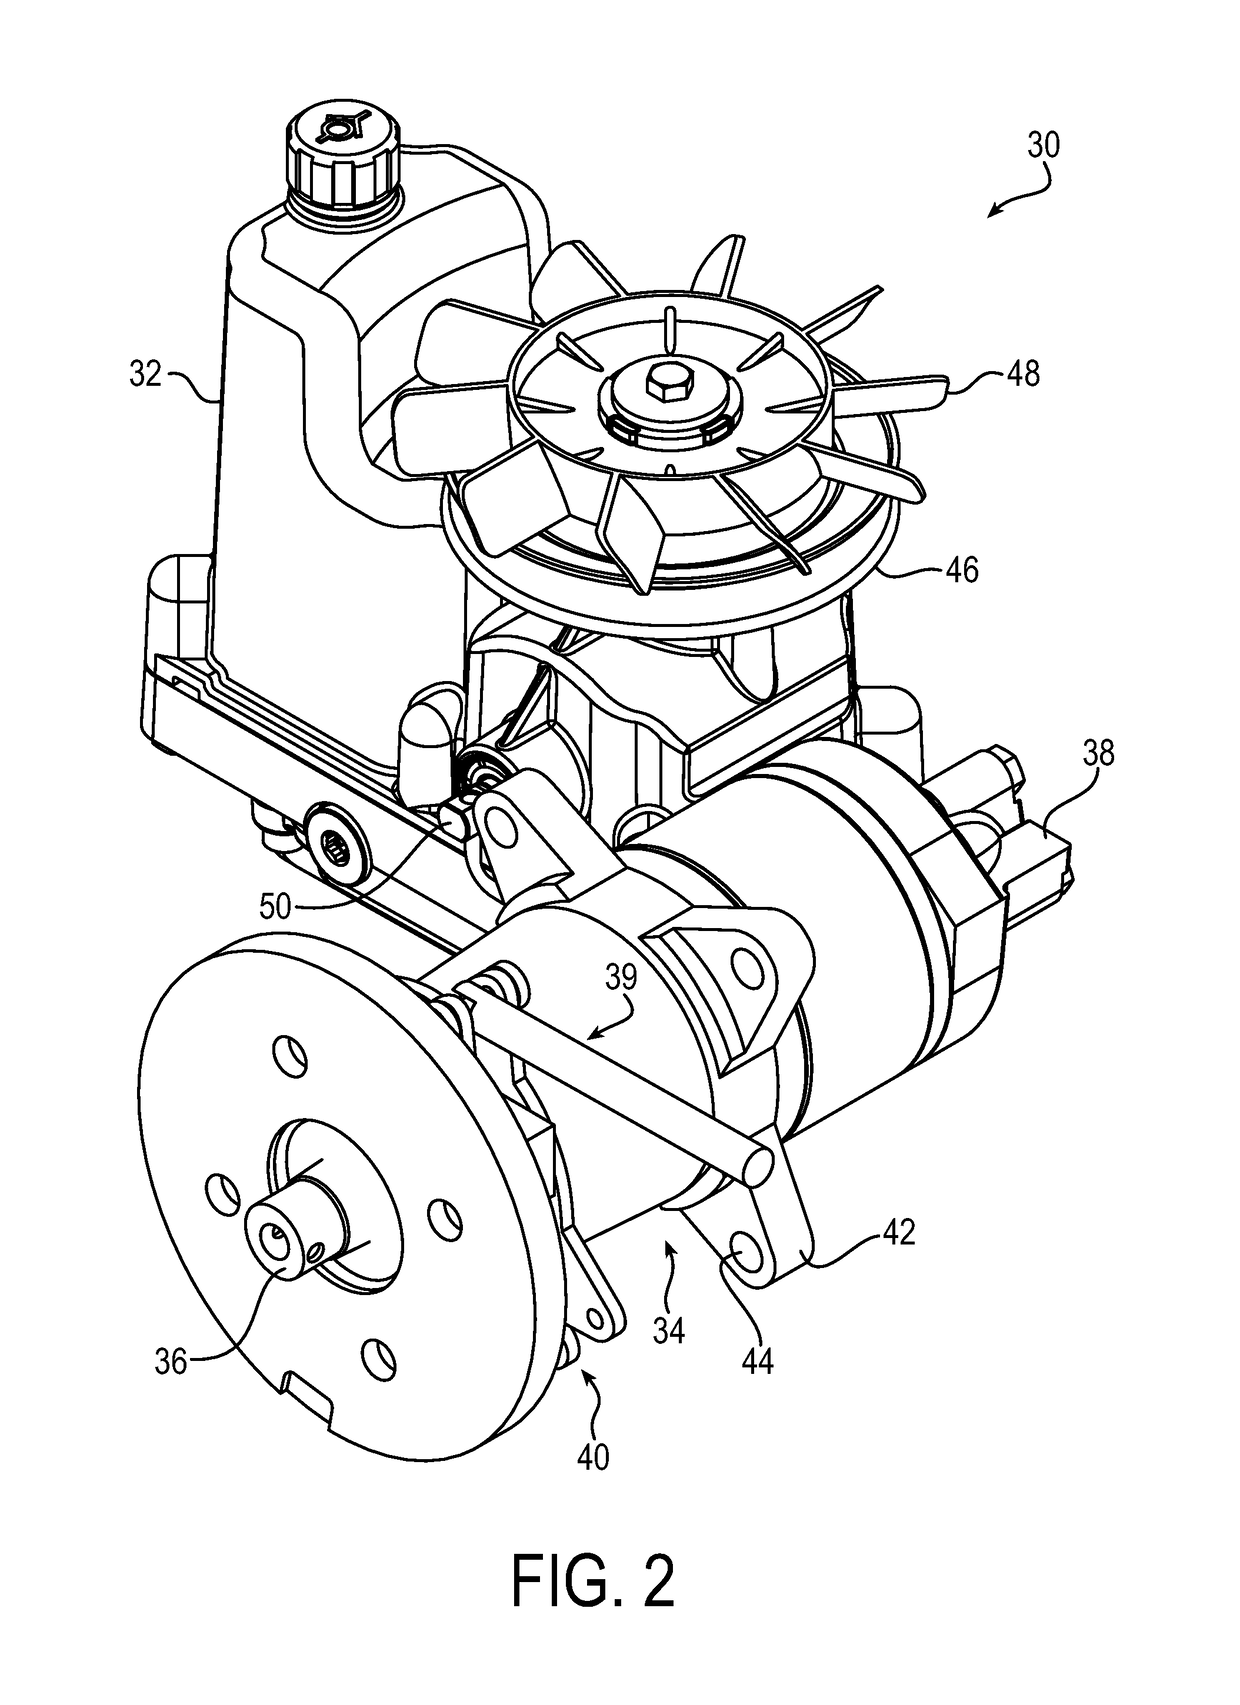 Mowing machine brake apparatus with slideable engagement